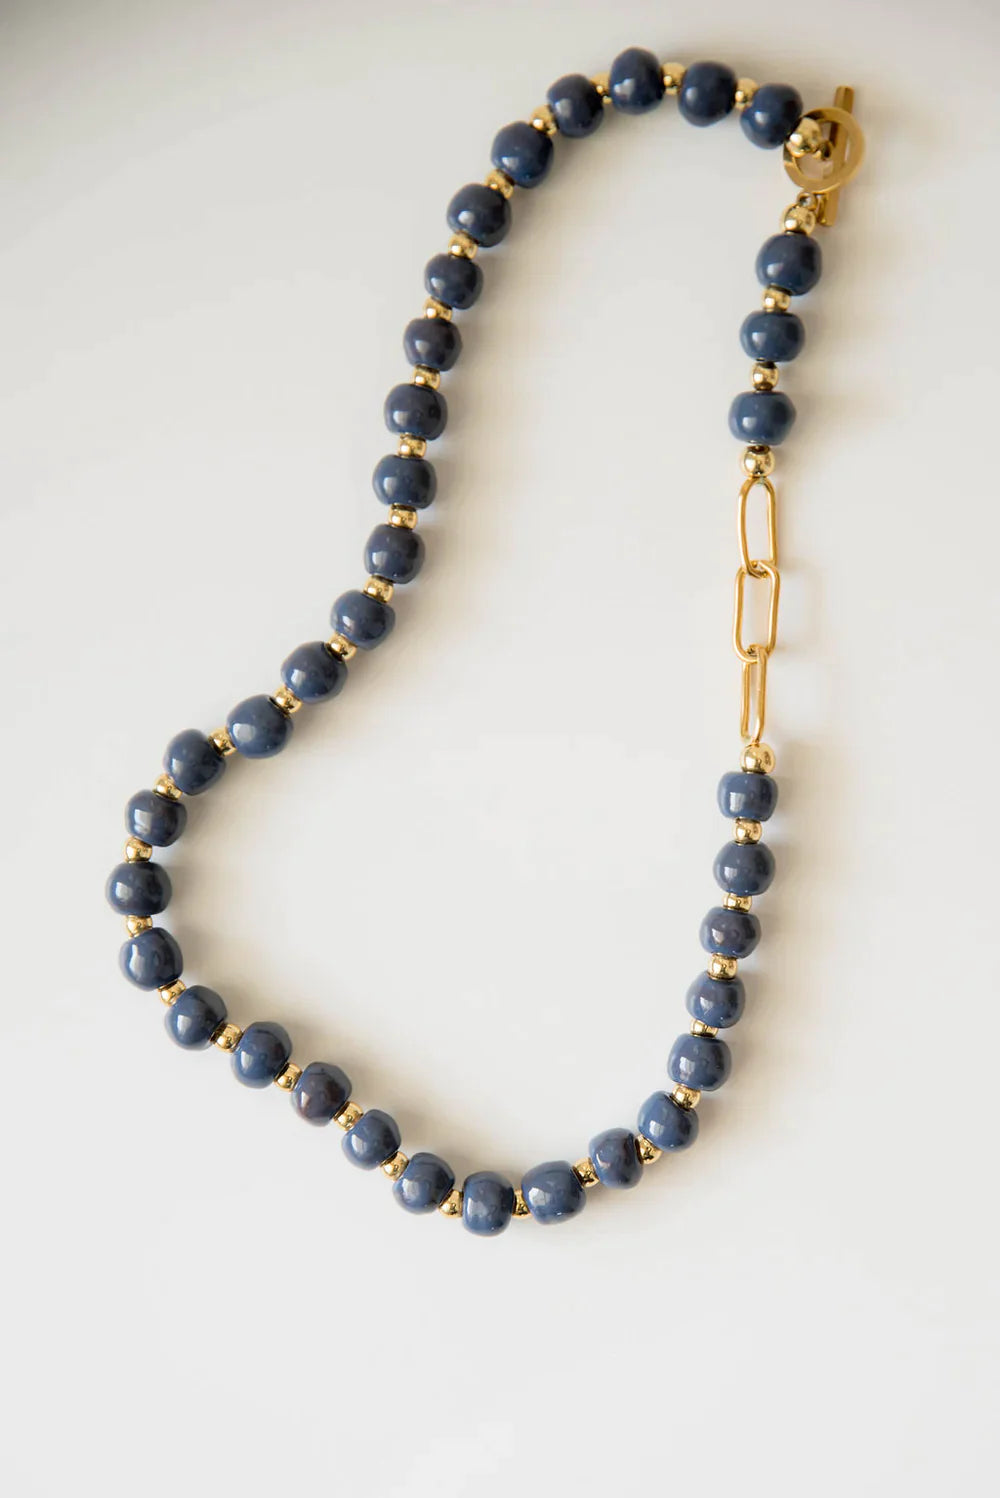 Bel Koz Single Strand Toggle Clay Necklace - FRENCH NAVY - Link in description to purchase at Betsey's